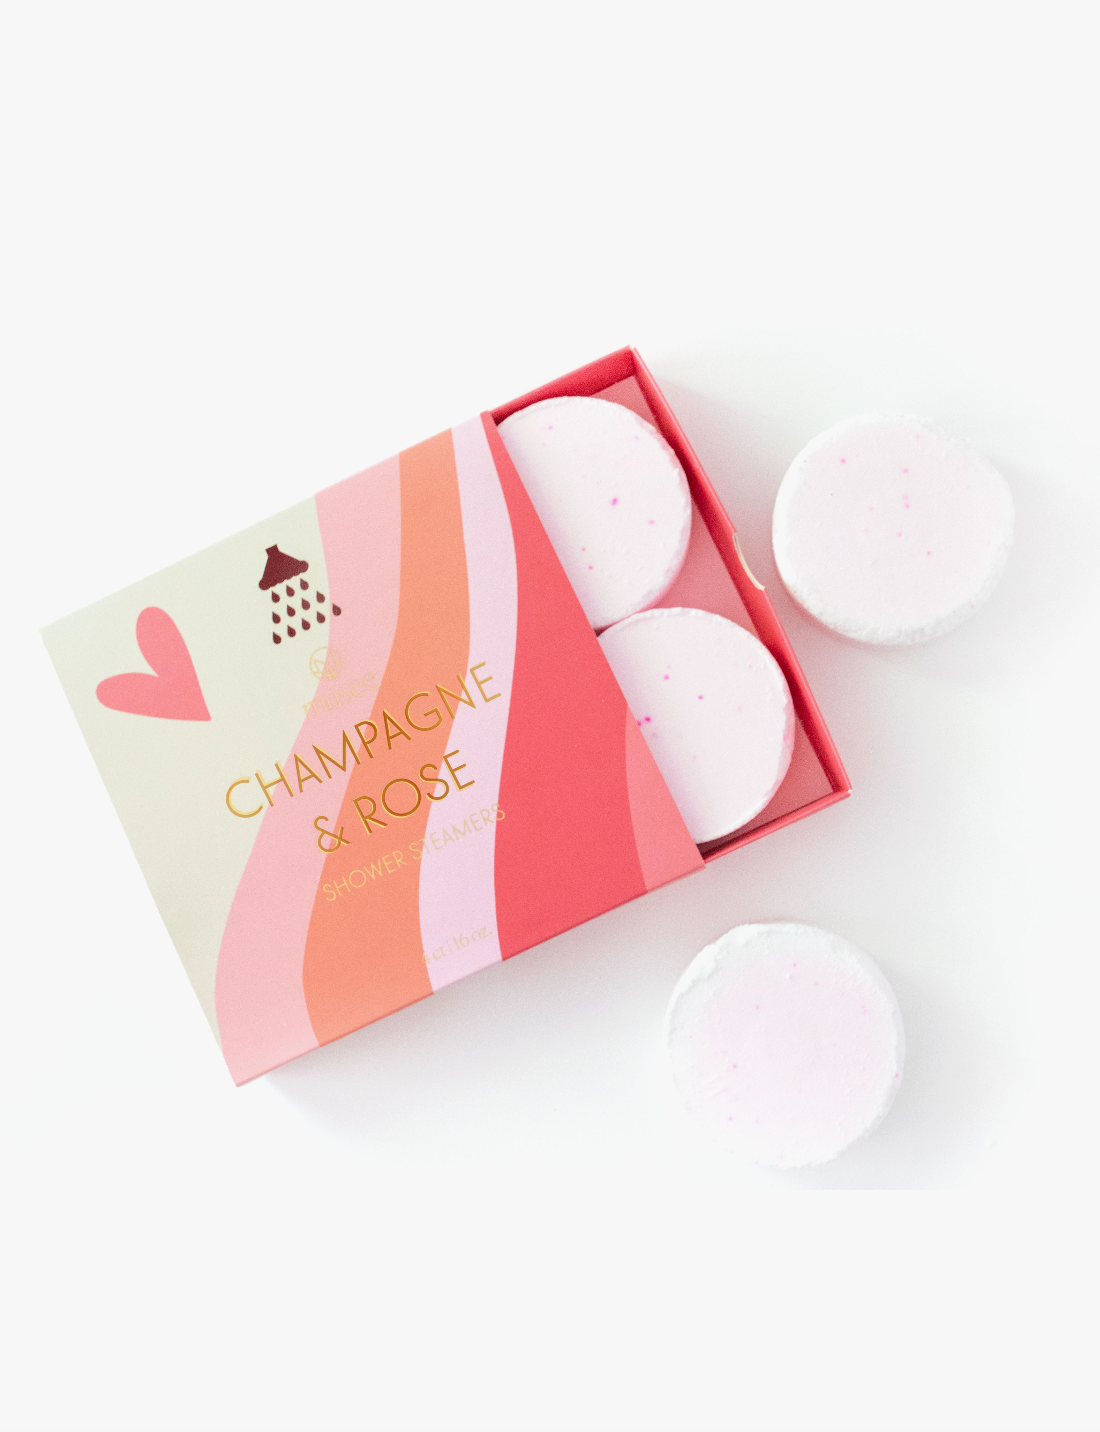 Musee "Champagne & Rose" Shower Steamers